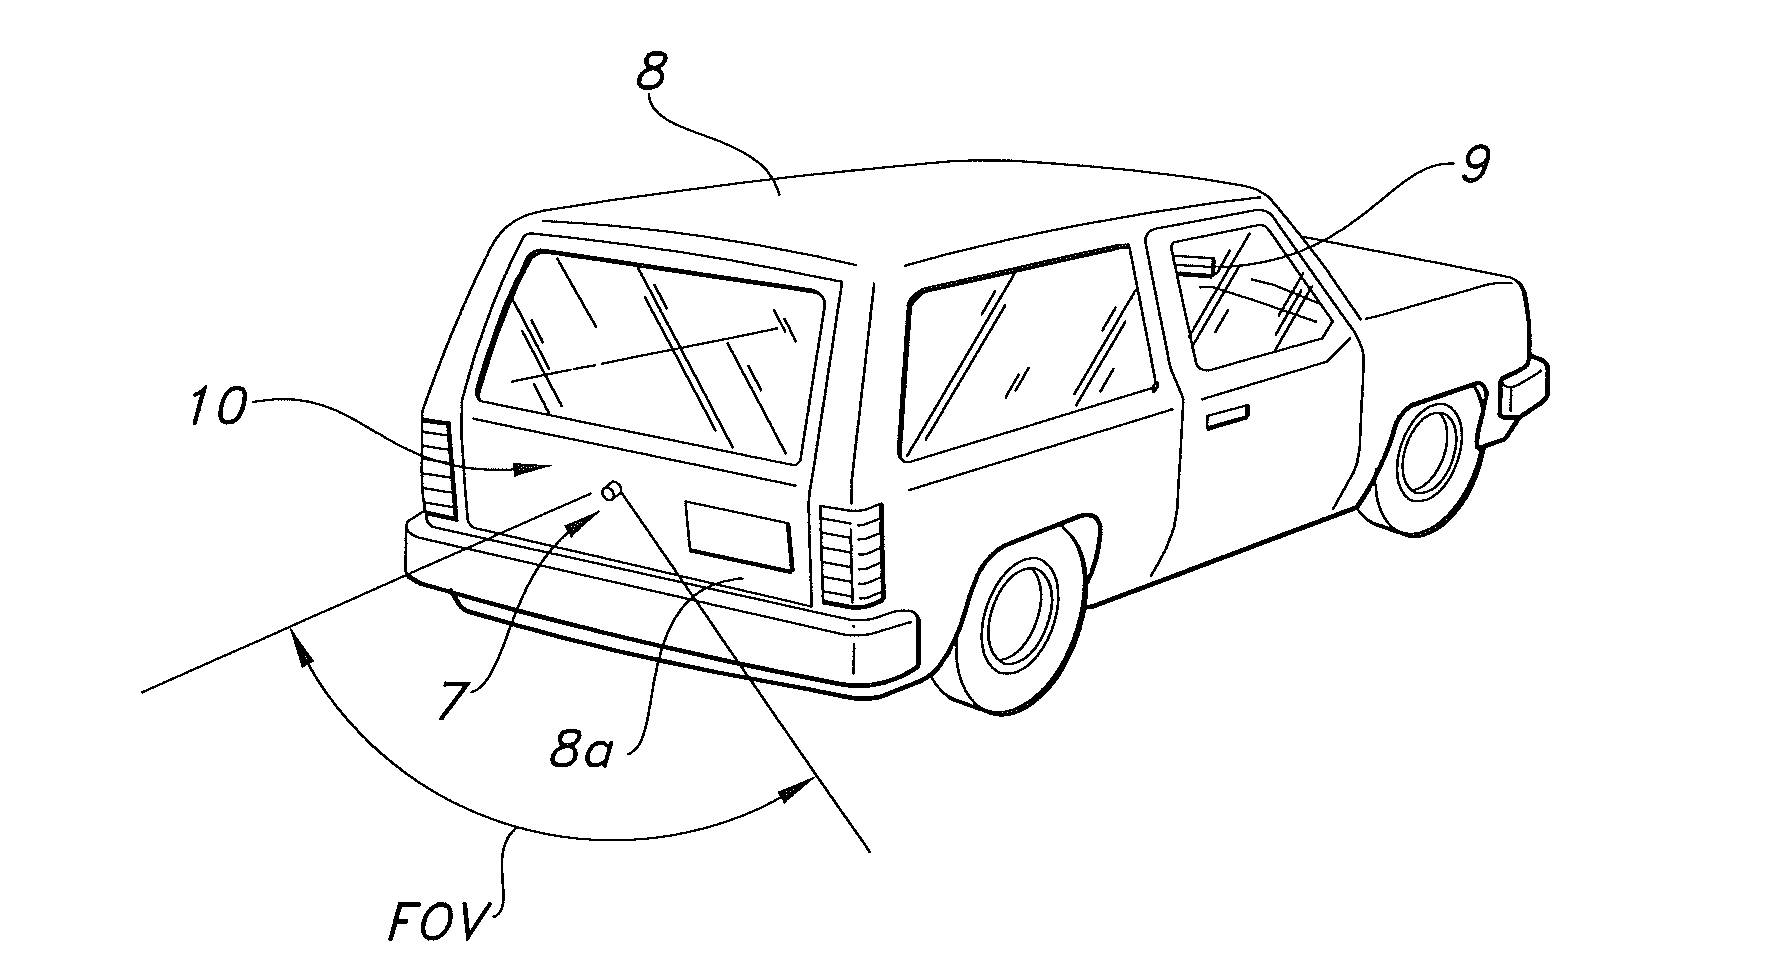 Integrated Automotive System, Pop Up Nozzle Assembly and Remote Control Method for Cleaning a Wide Angle Image Sensors Exterior Surface